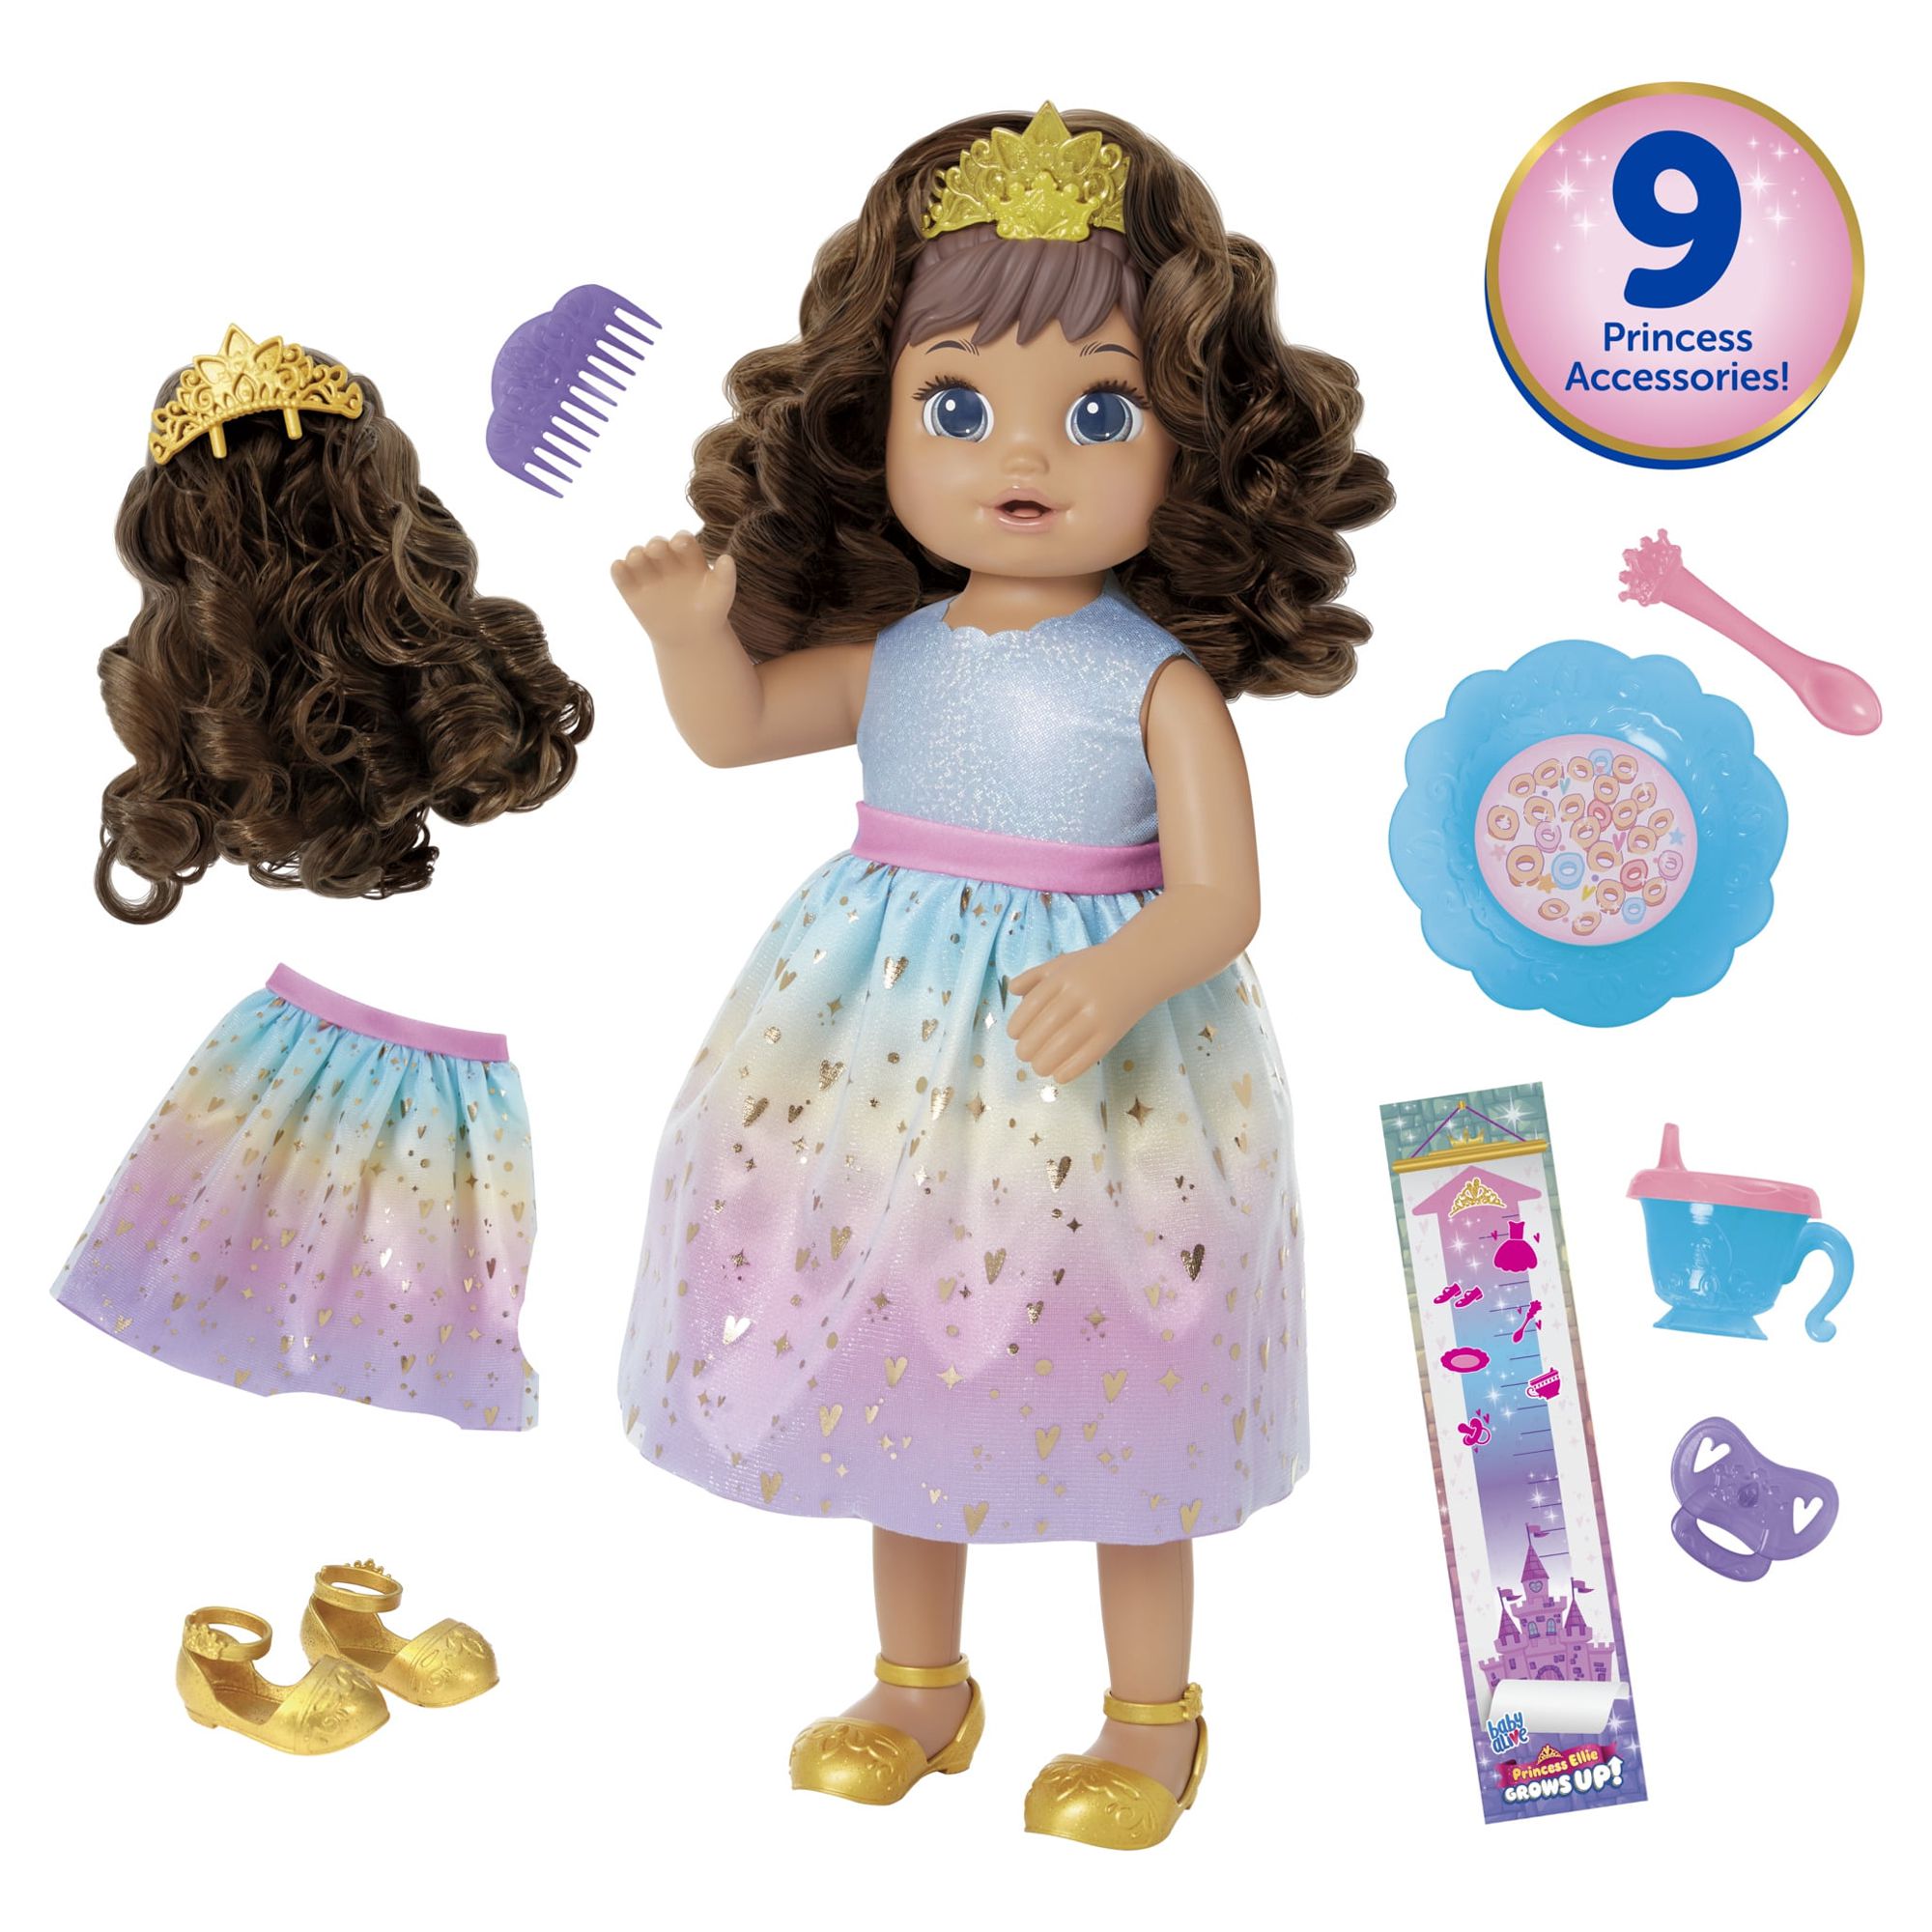 Baby Alive: Princess Ellie Grows Up! 15-Inch Doll Brown Hair, Brown Eyes Kids Toy for Boys and Girls - image 1 of 13